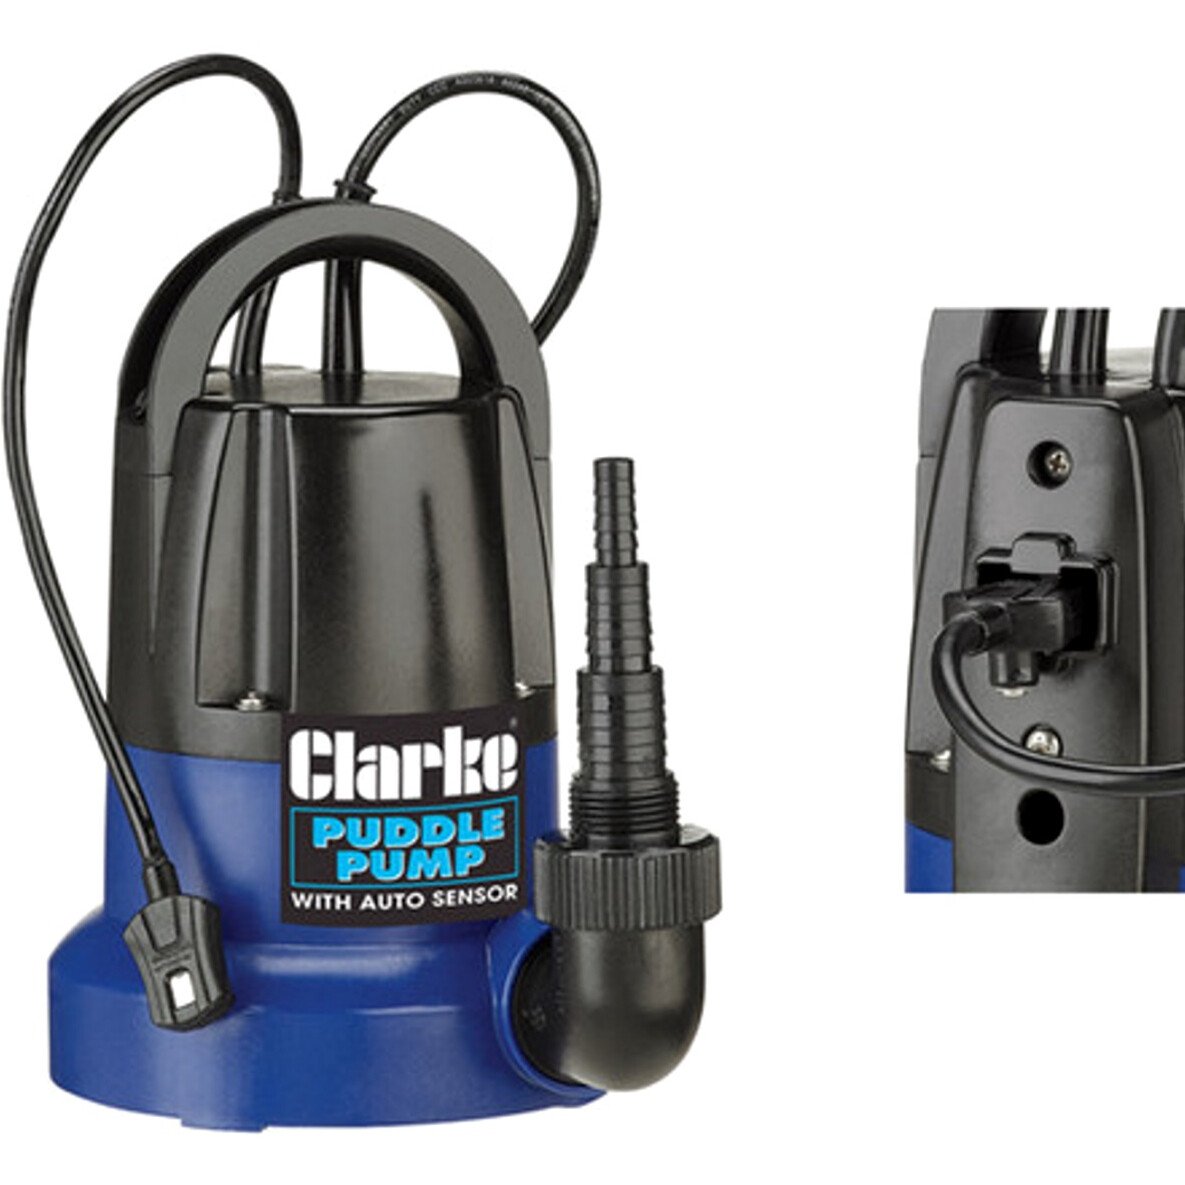 Clarke PSP125B 400W 230v Clean Water Puddle Pump with Auto Sensor 7230694